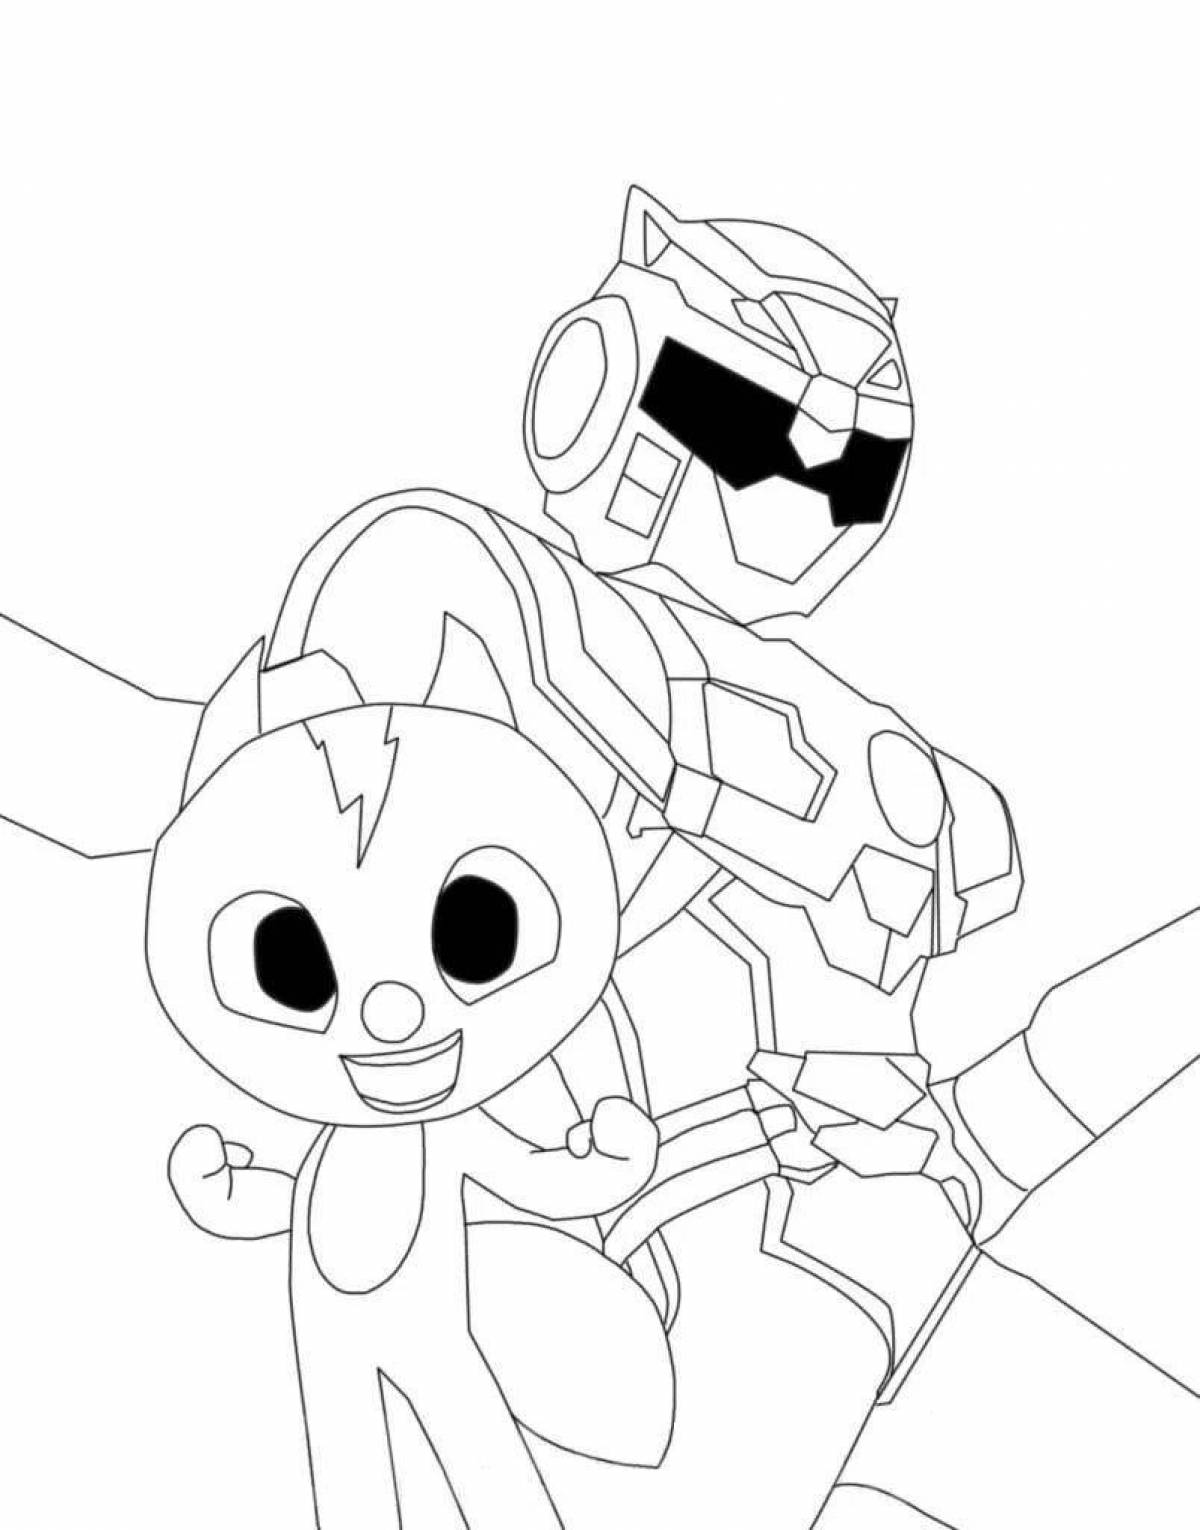 Mini force live coloring page